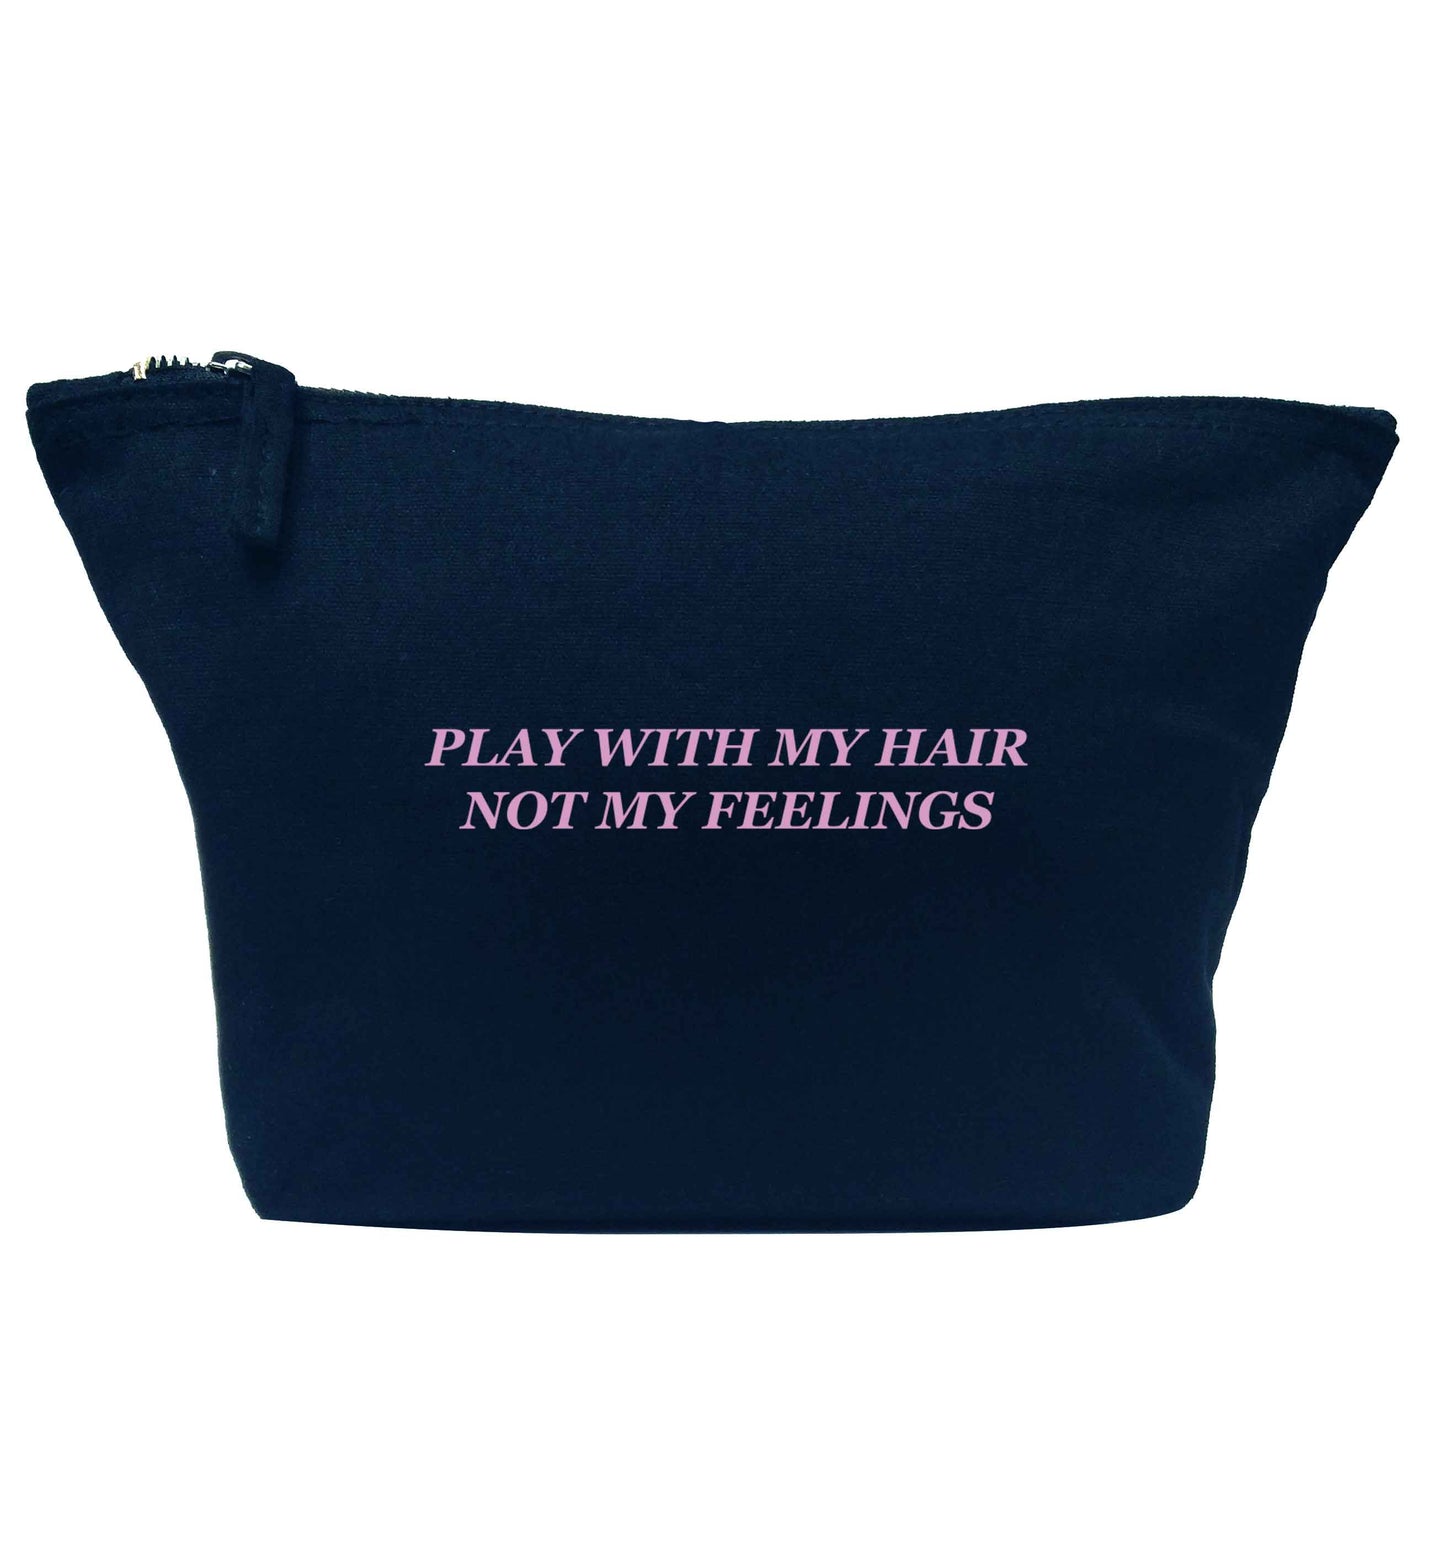 Play with my hair not my feelings navy makeup bag